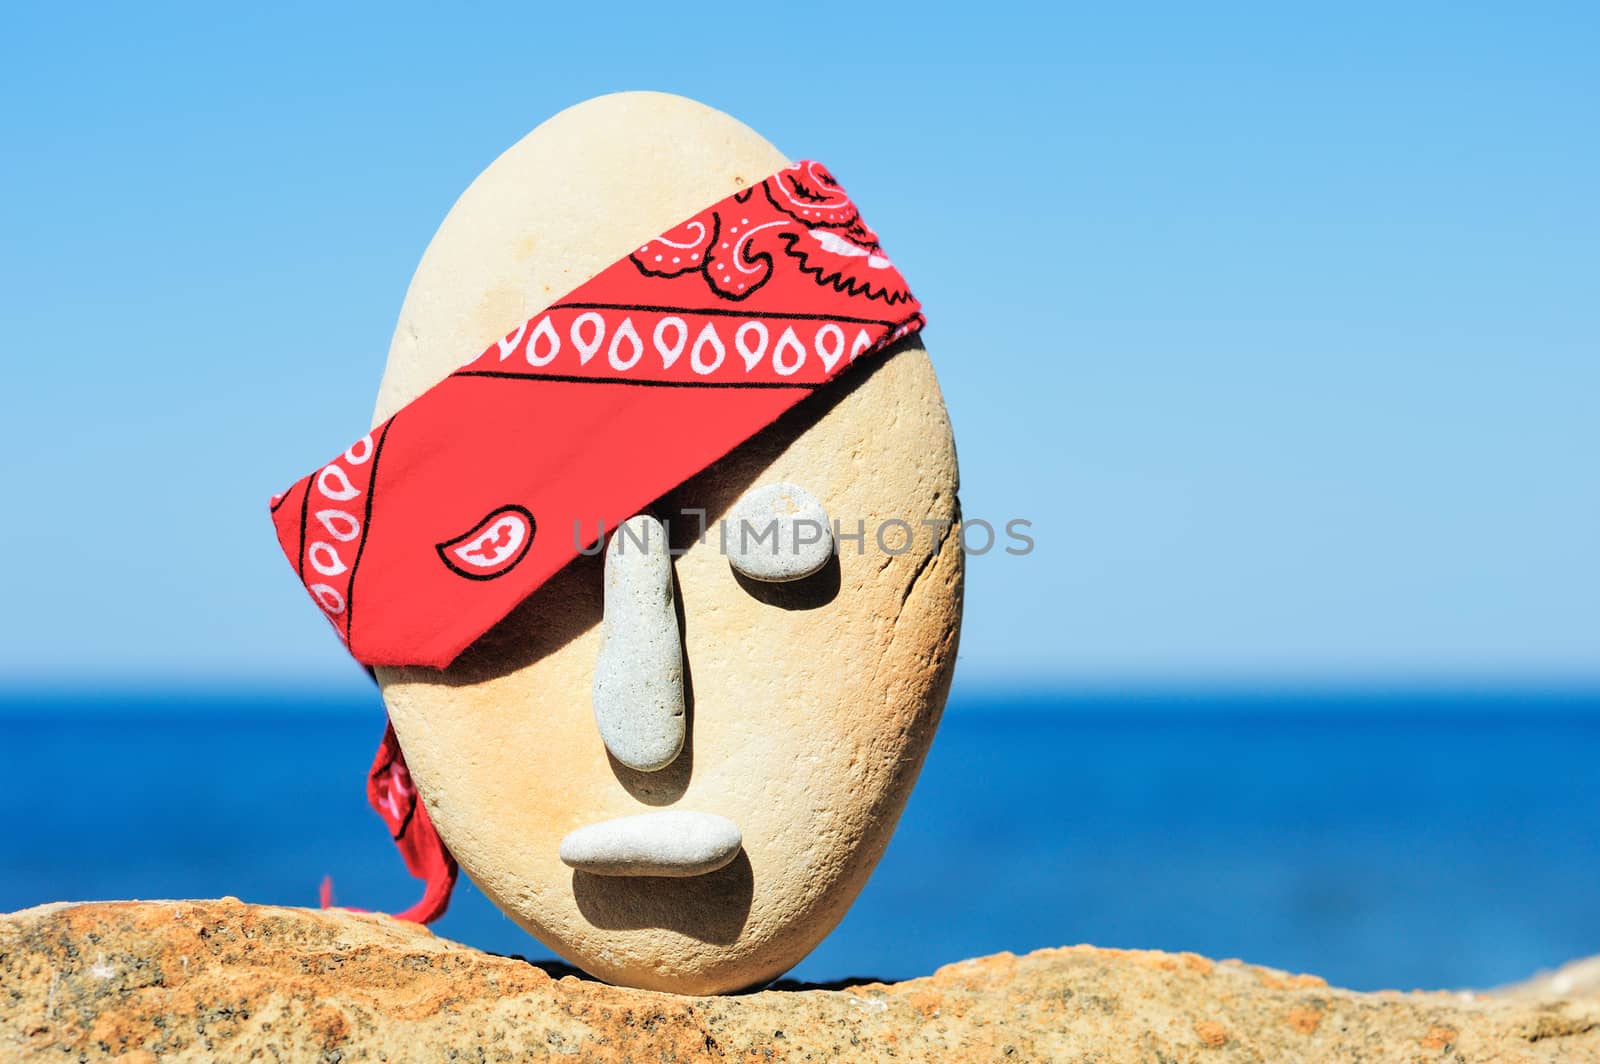 Image of stone head with a patterned red bandana